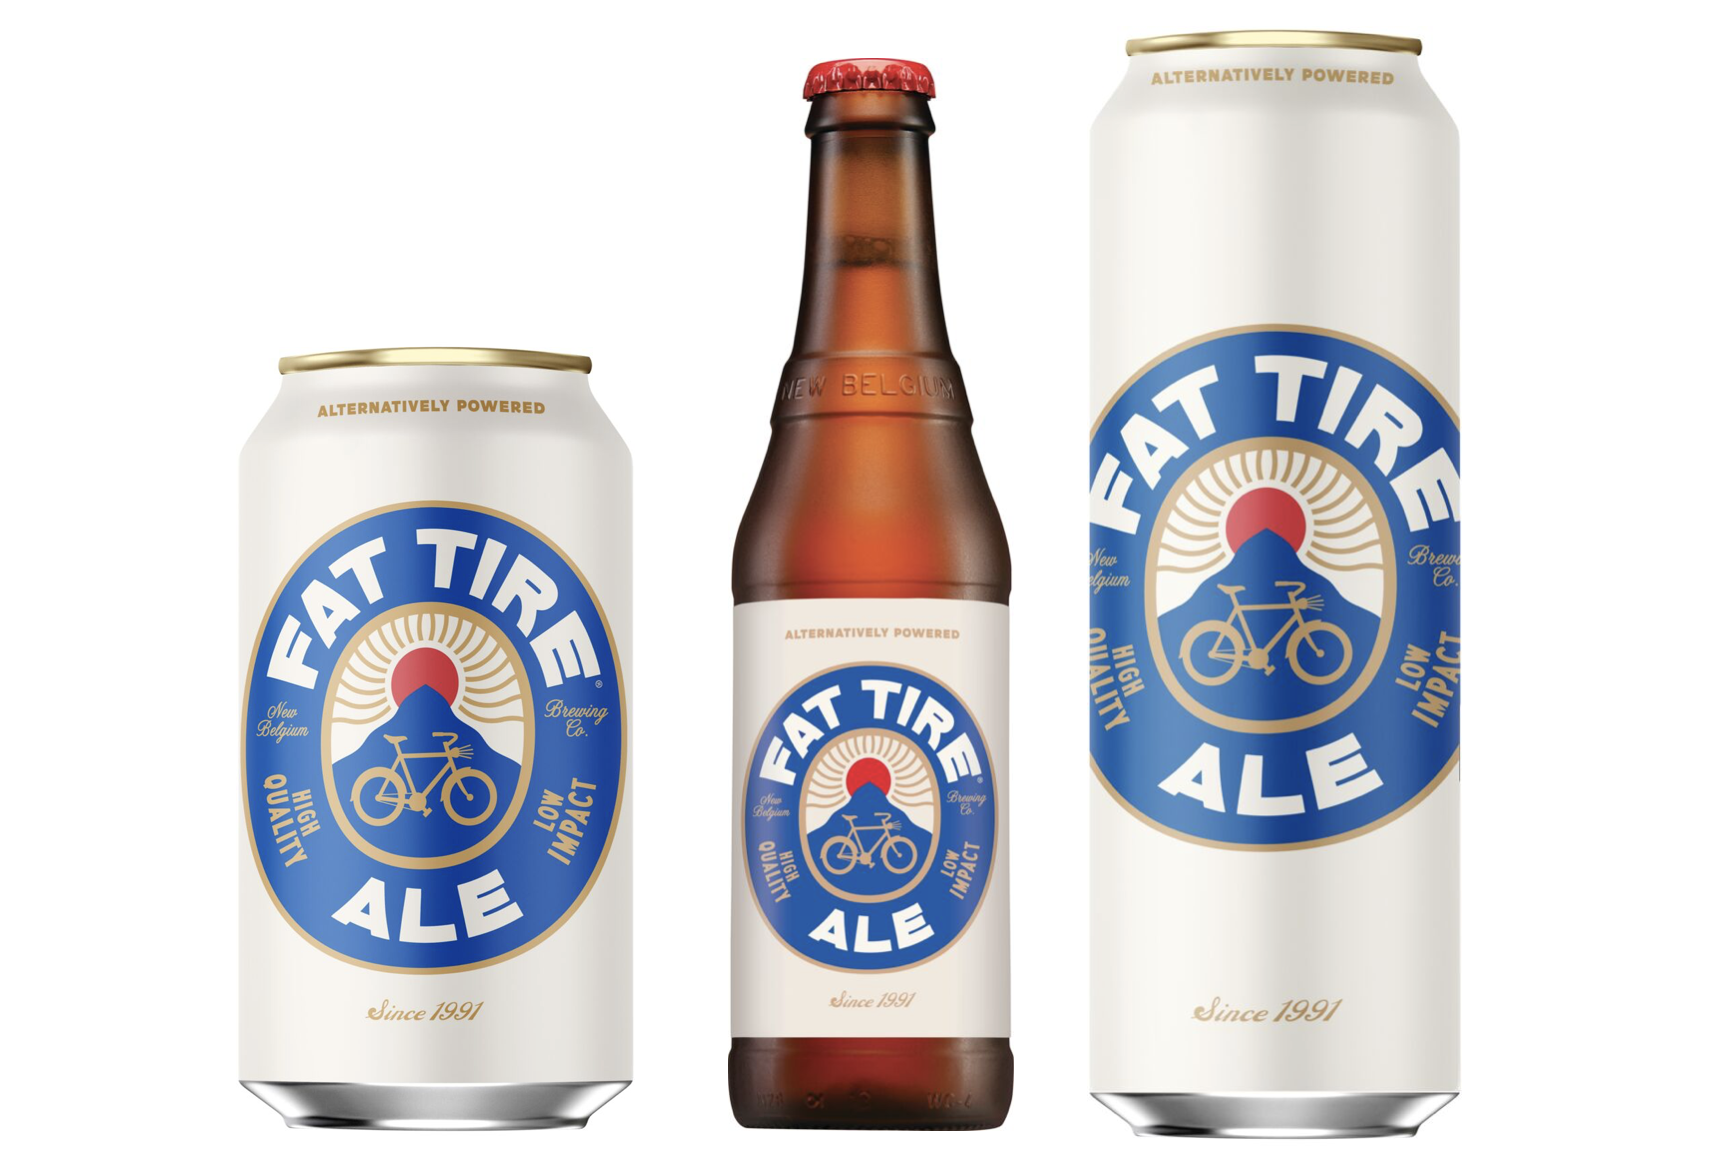 New Belgium Brewing's newly formulated Fat Tire Ale is available in 12oz and 19.2oz cans and 12oz cans as well as on draft.